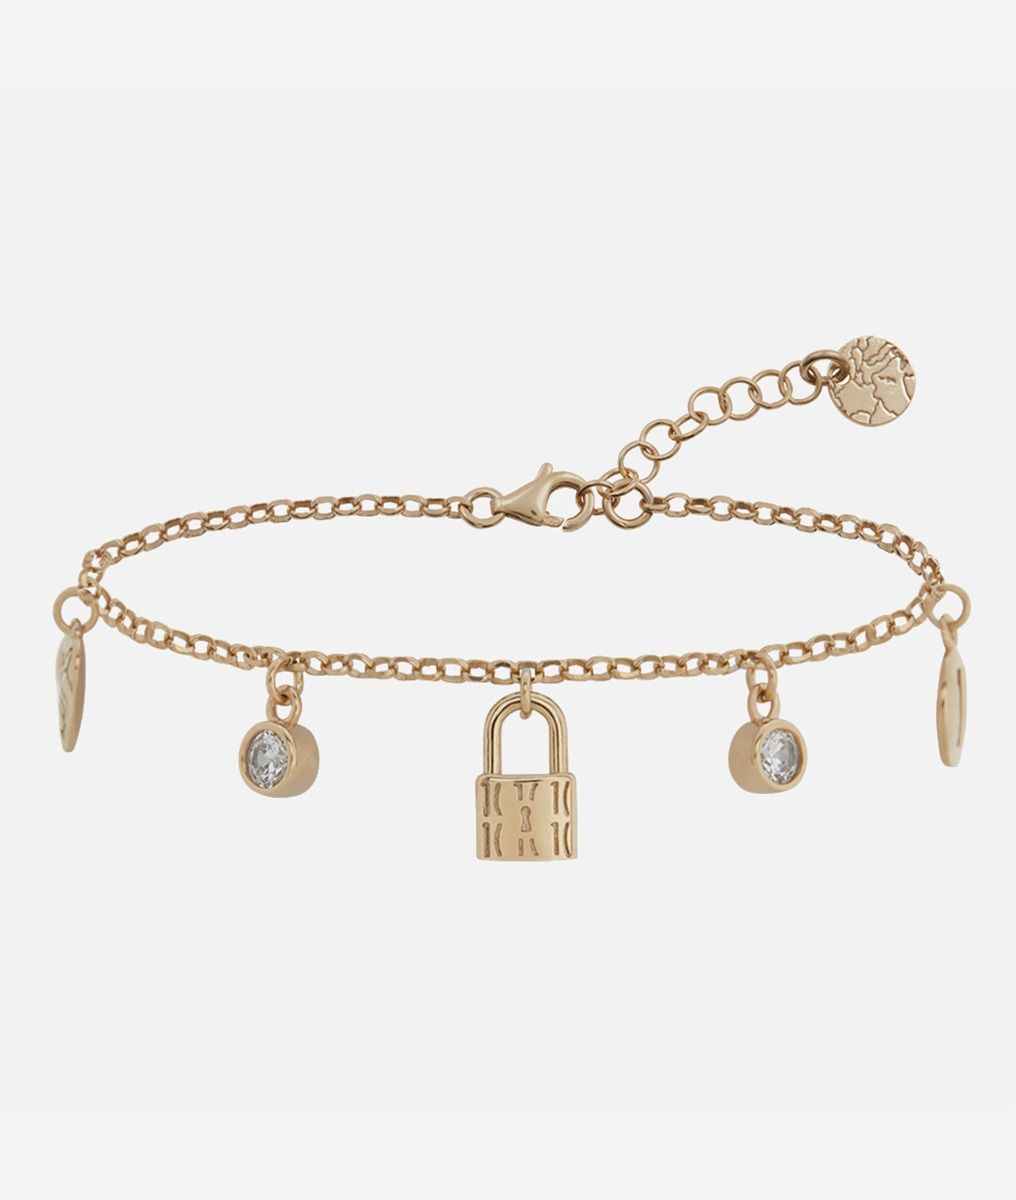 Rambla bracelet with charms dipped in Yellow Gold,front